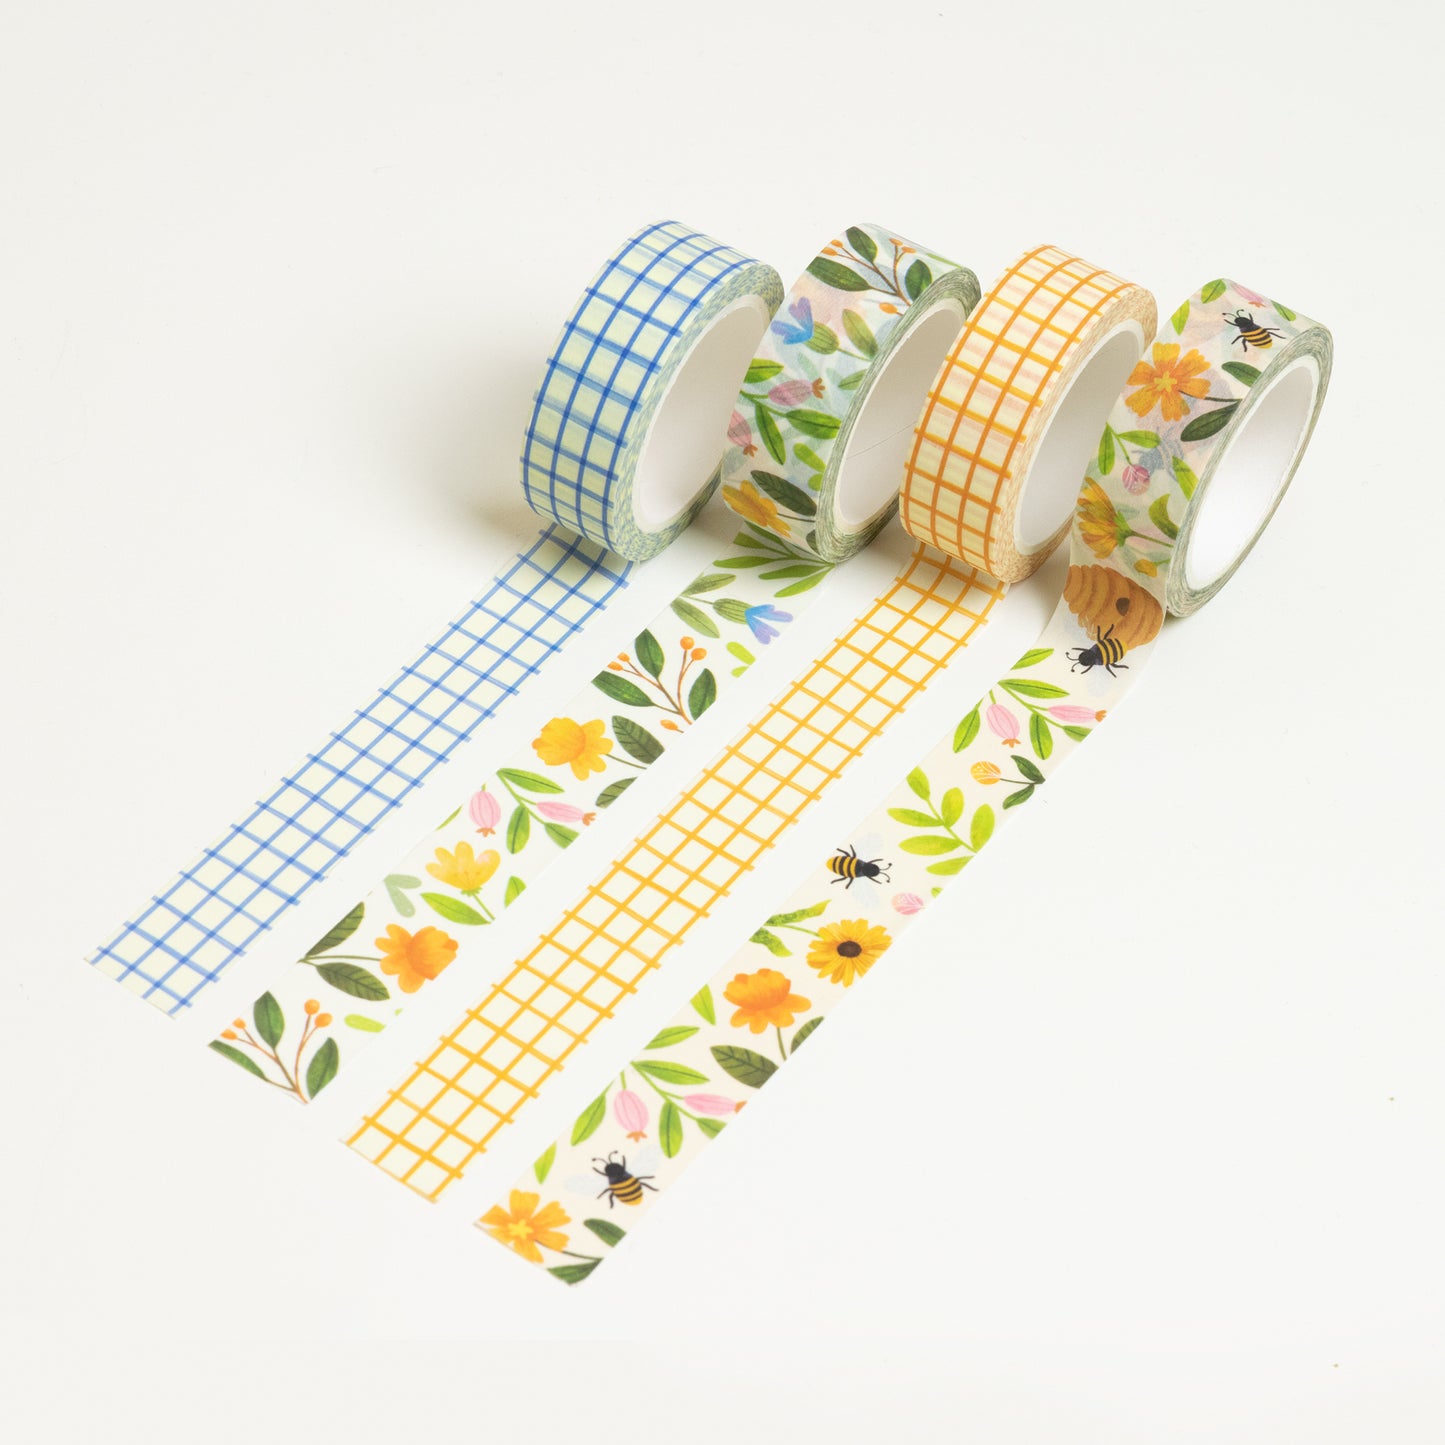 Set of 4 floral washi tape designs from above